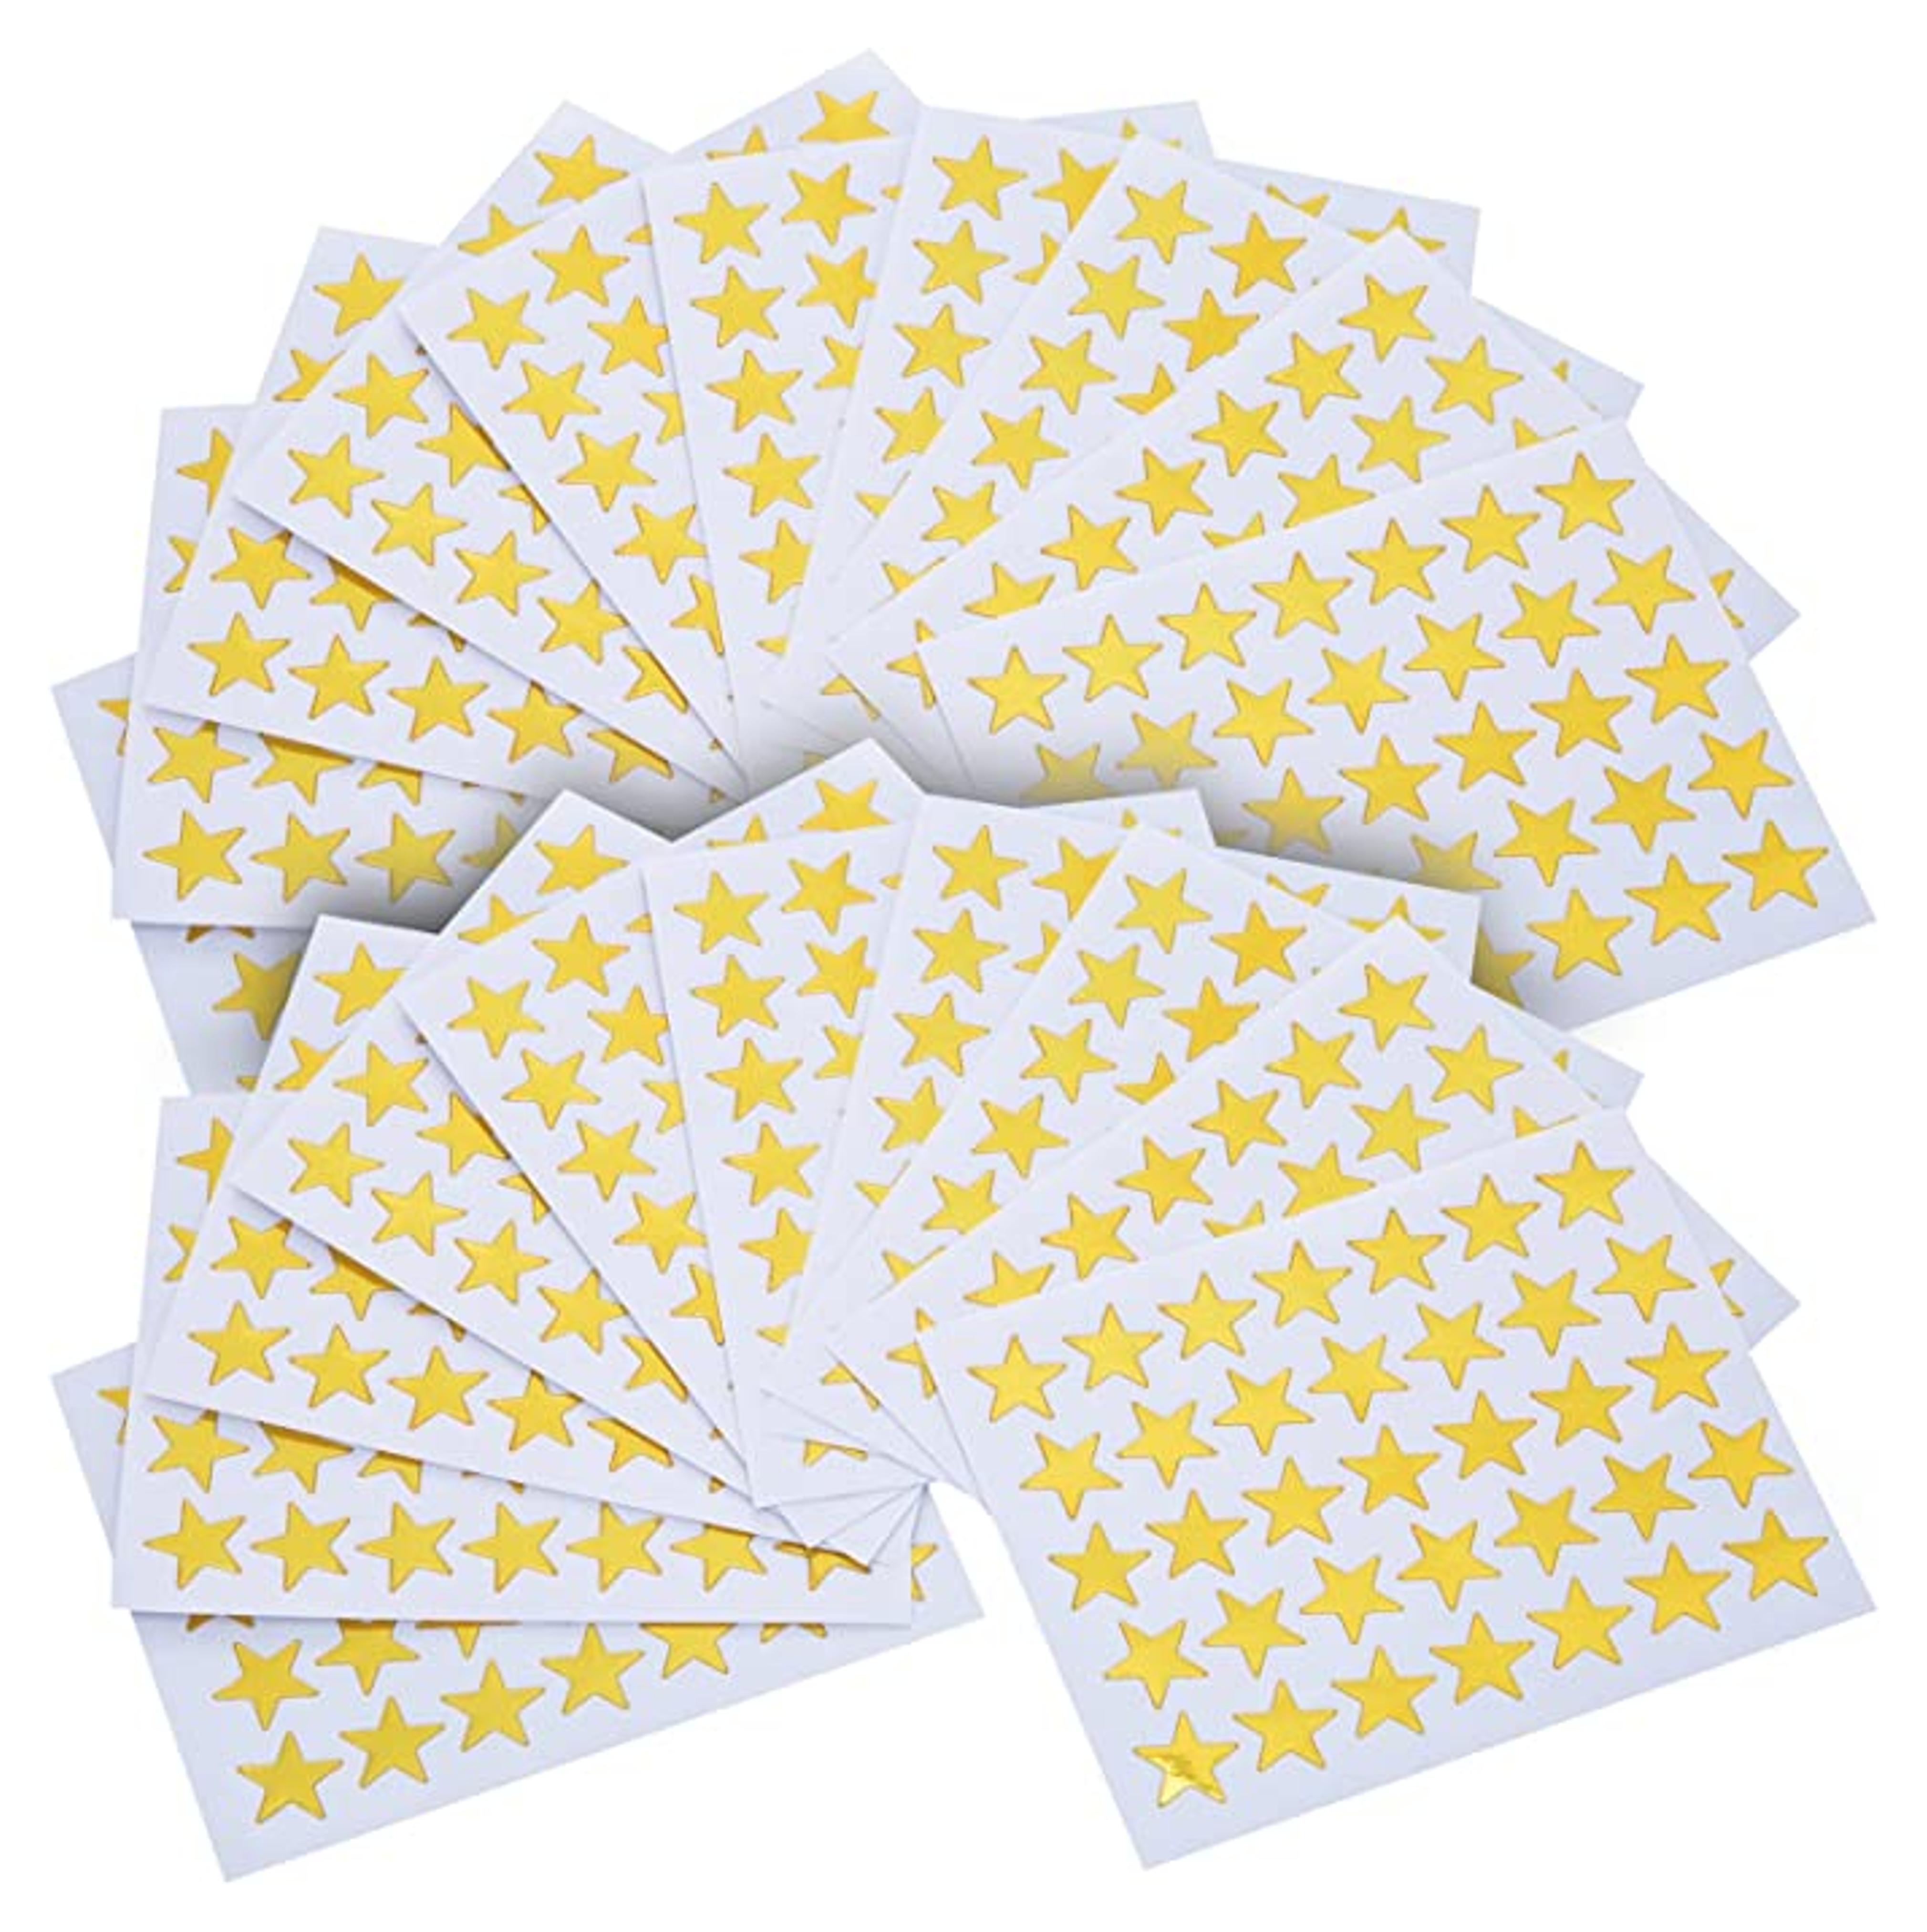 Amazon.com: EBOOT Star Stickers 1750 Count Self-Adhesive Stickers Stars (Gold) : Toys & Games